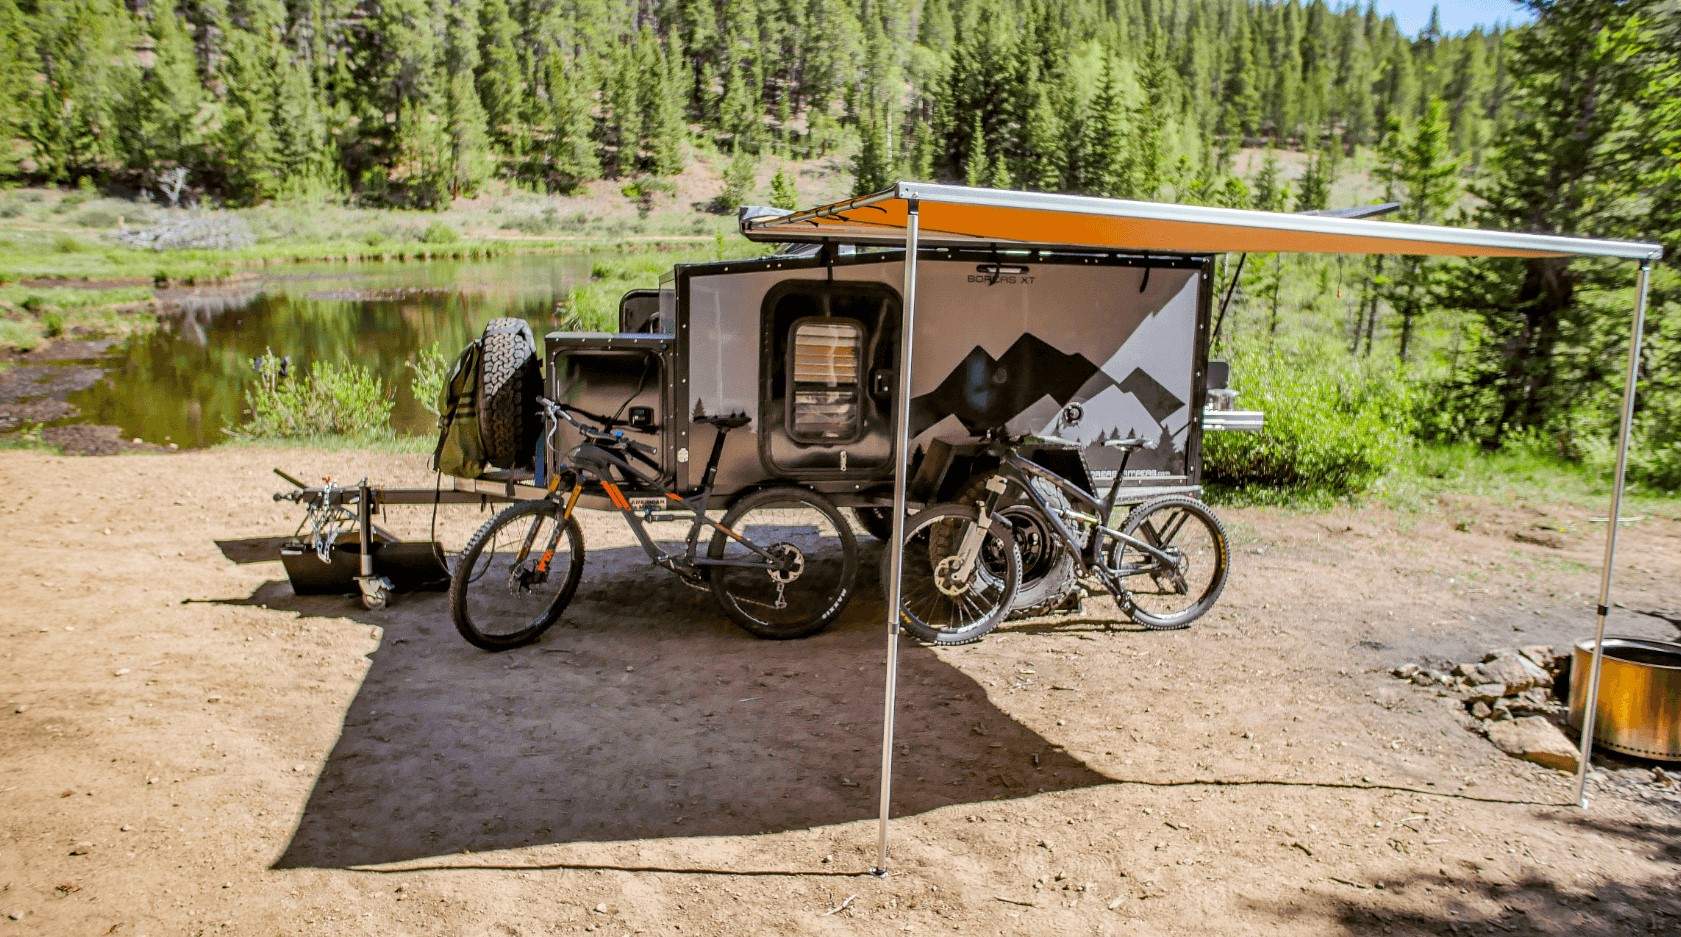 Camping in an off road camper trailer